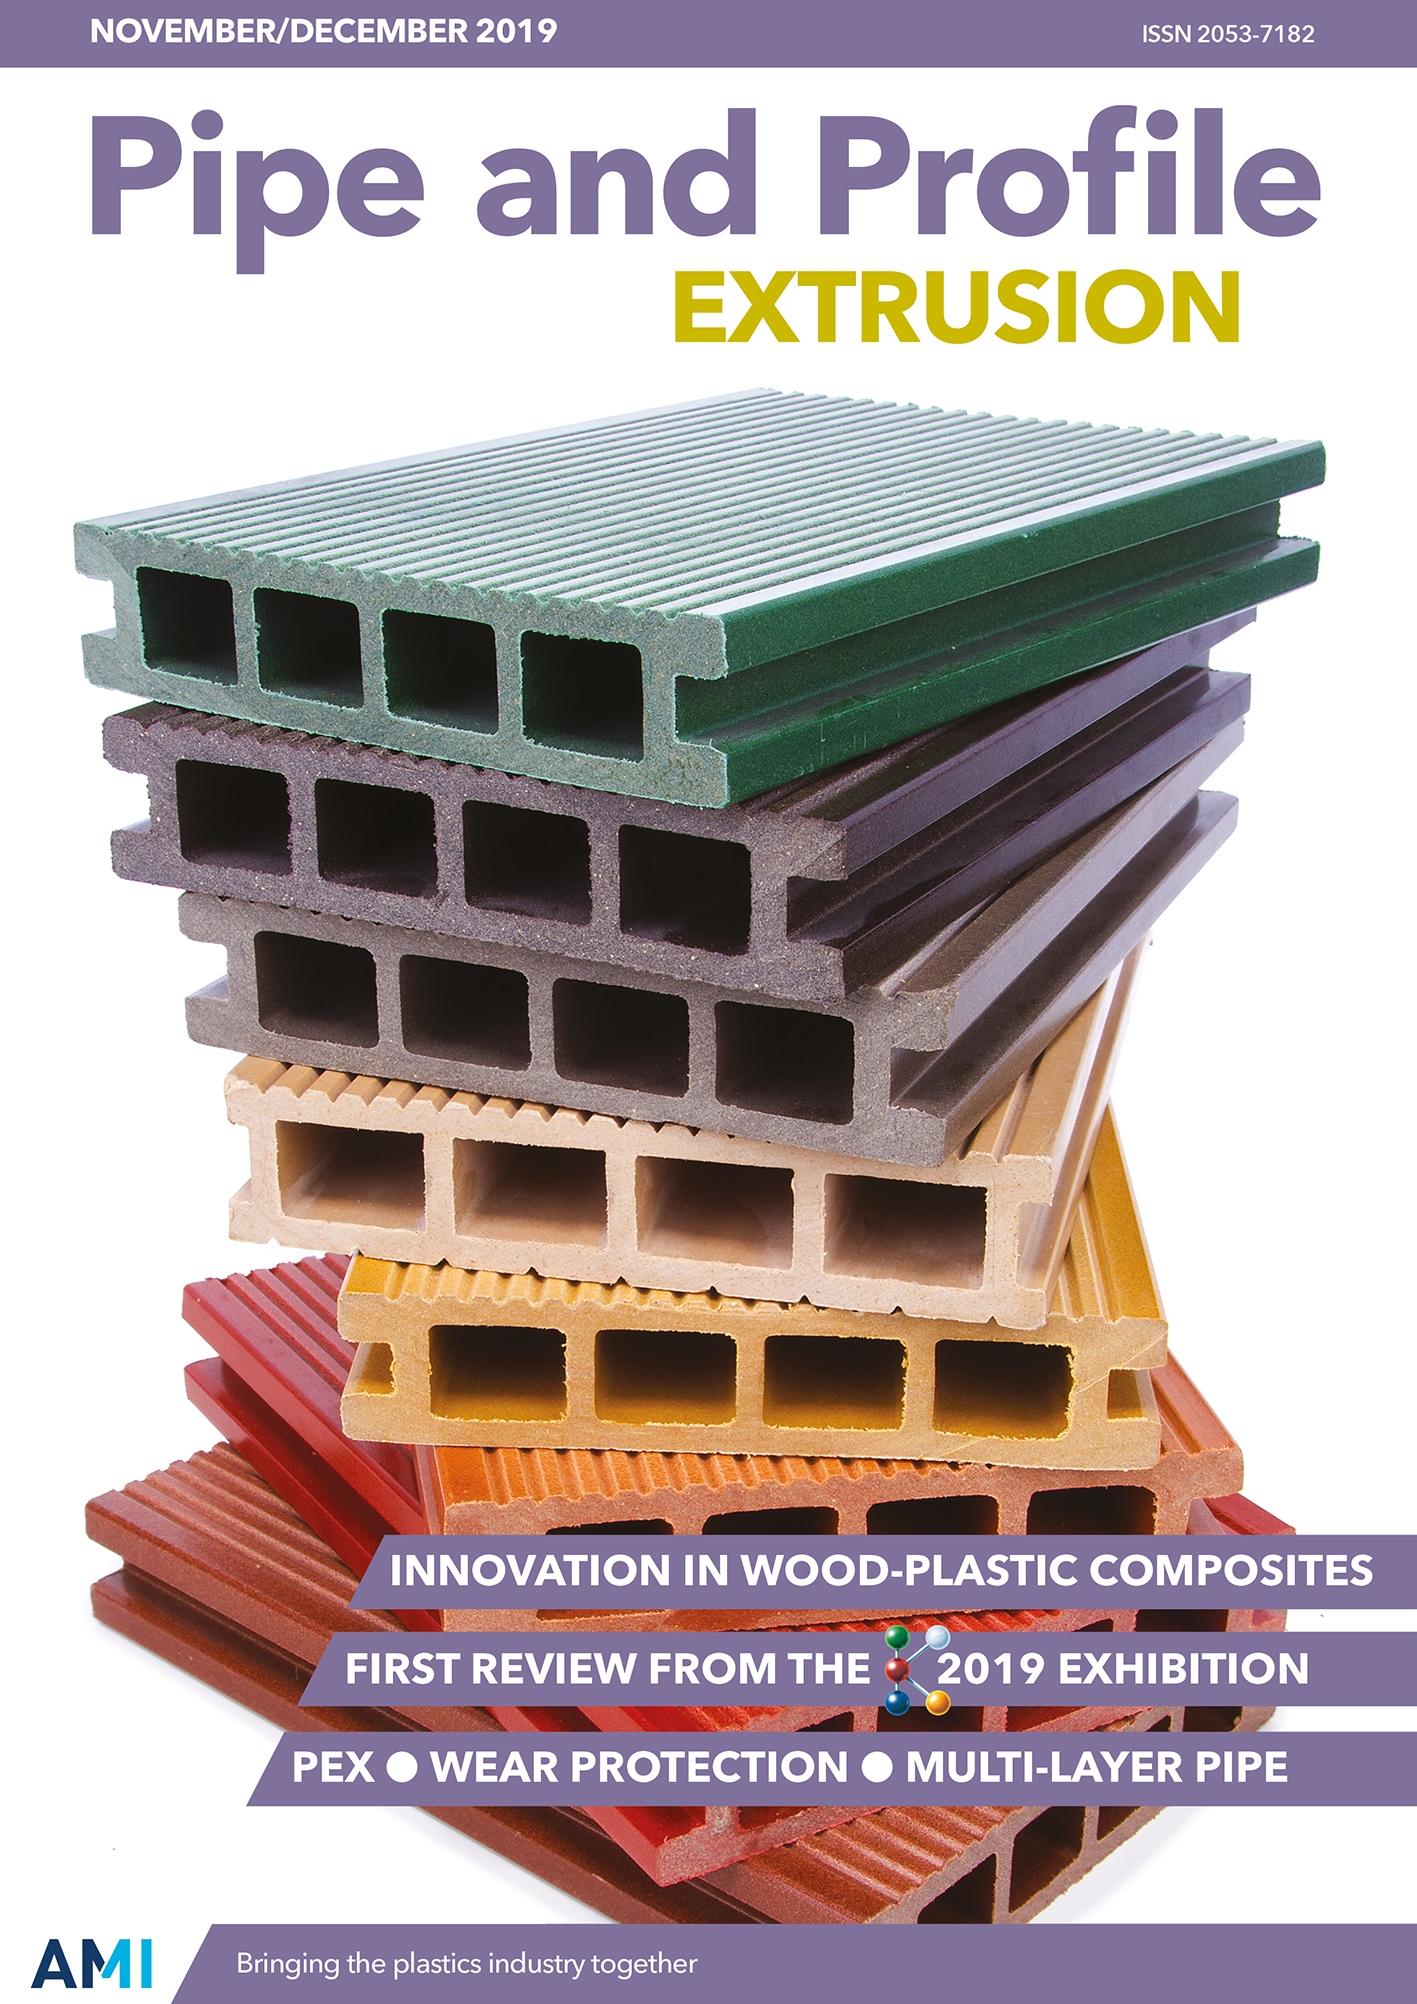 Pipe and Profile Extrusion November/December 2019